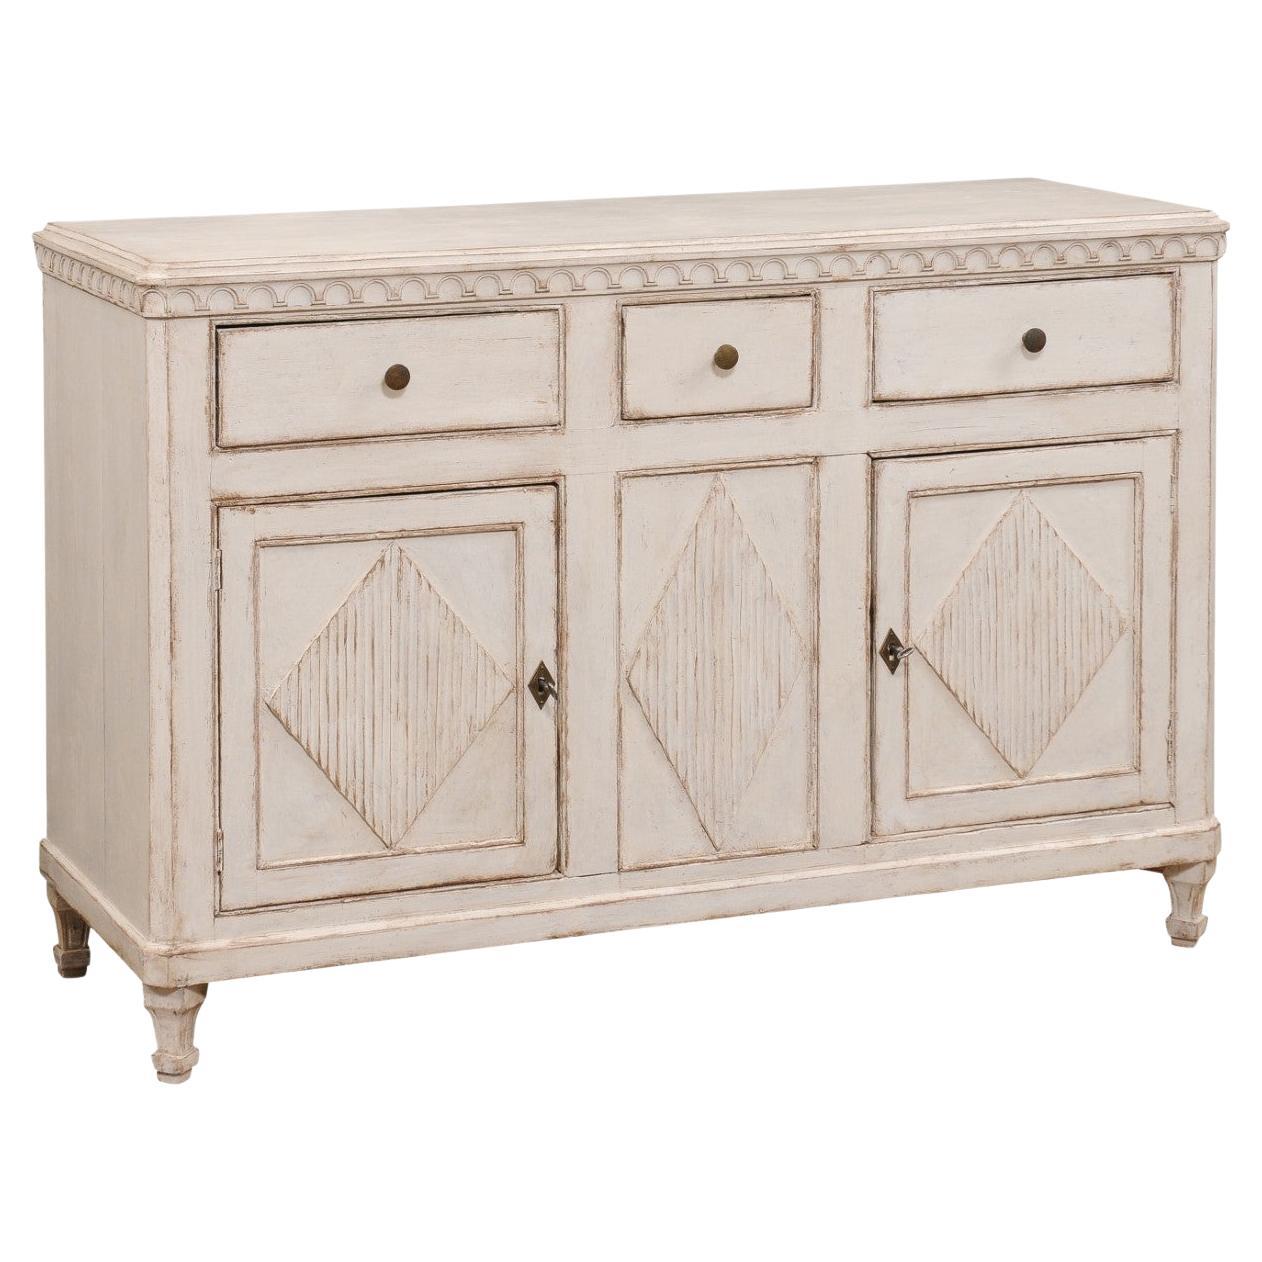 Swedish Gustavian Style 19th Century Painted Sideboard with Carved Motifs For Sale